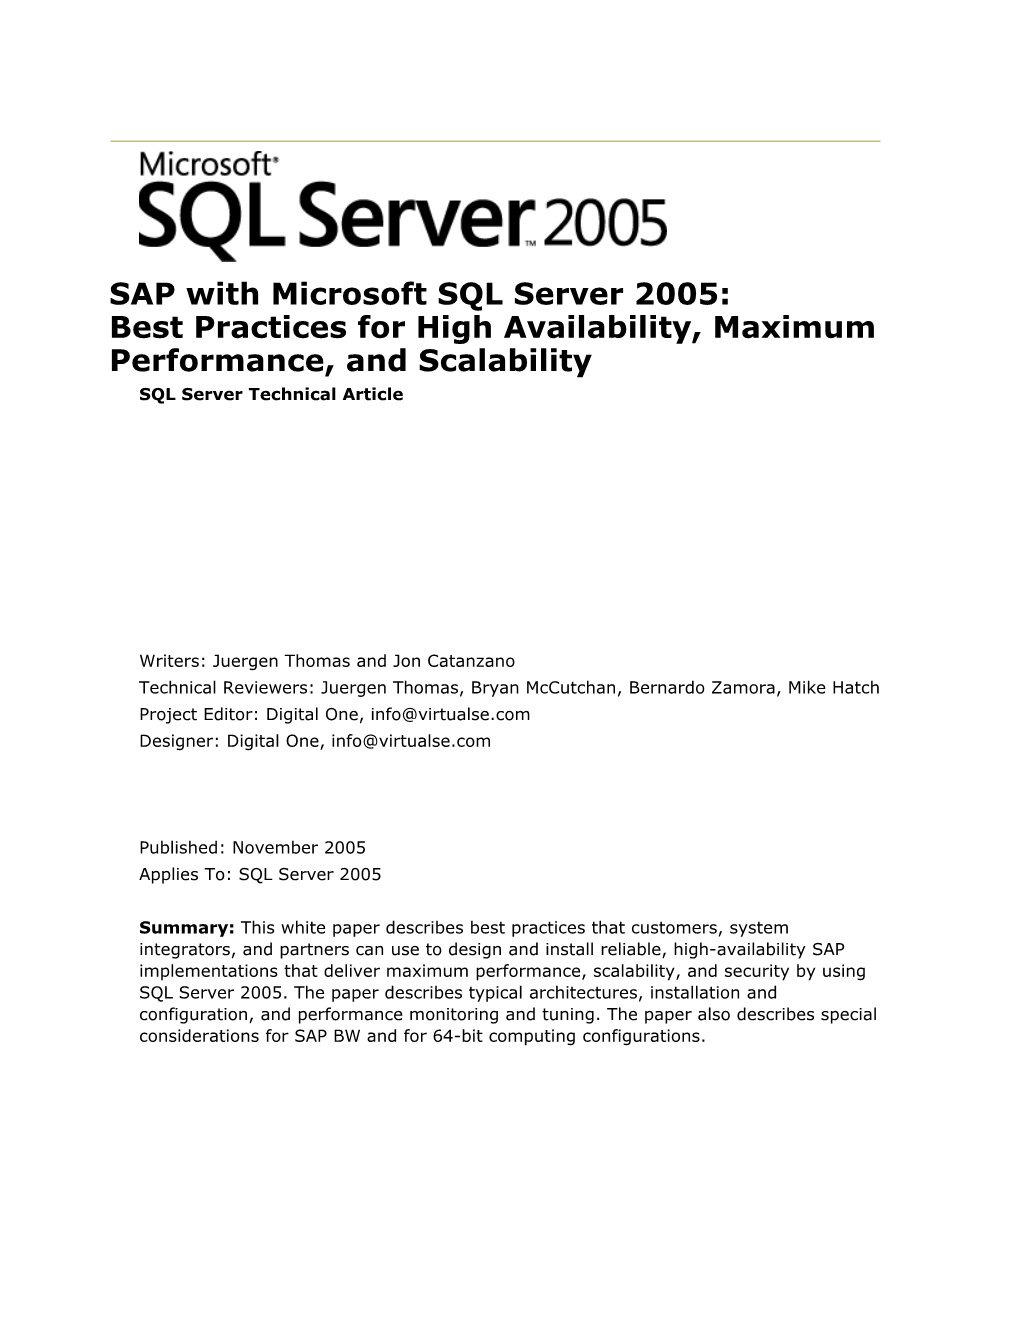 SAP with Microsoft SQL Server 2005: Best Practices for High Availability, Maximum Performance